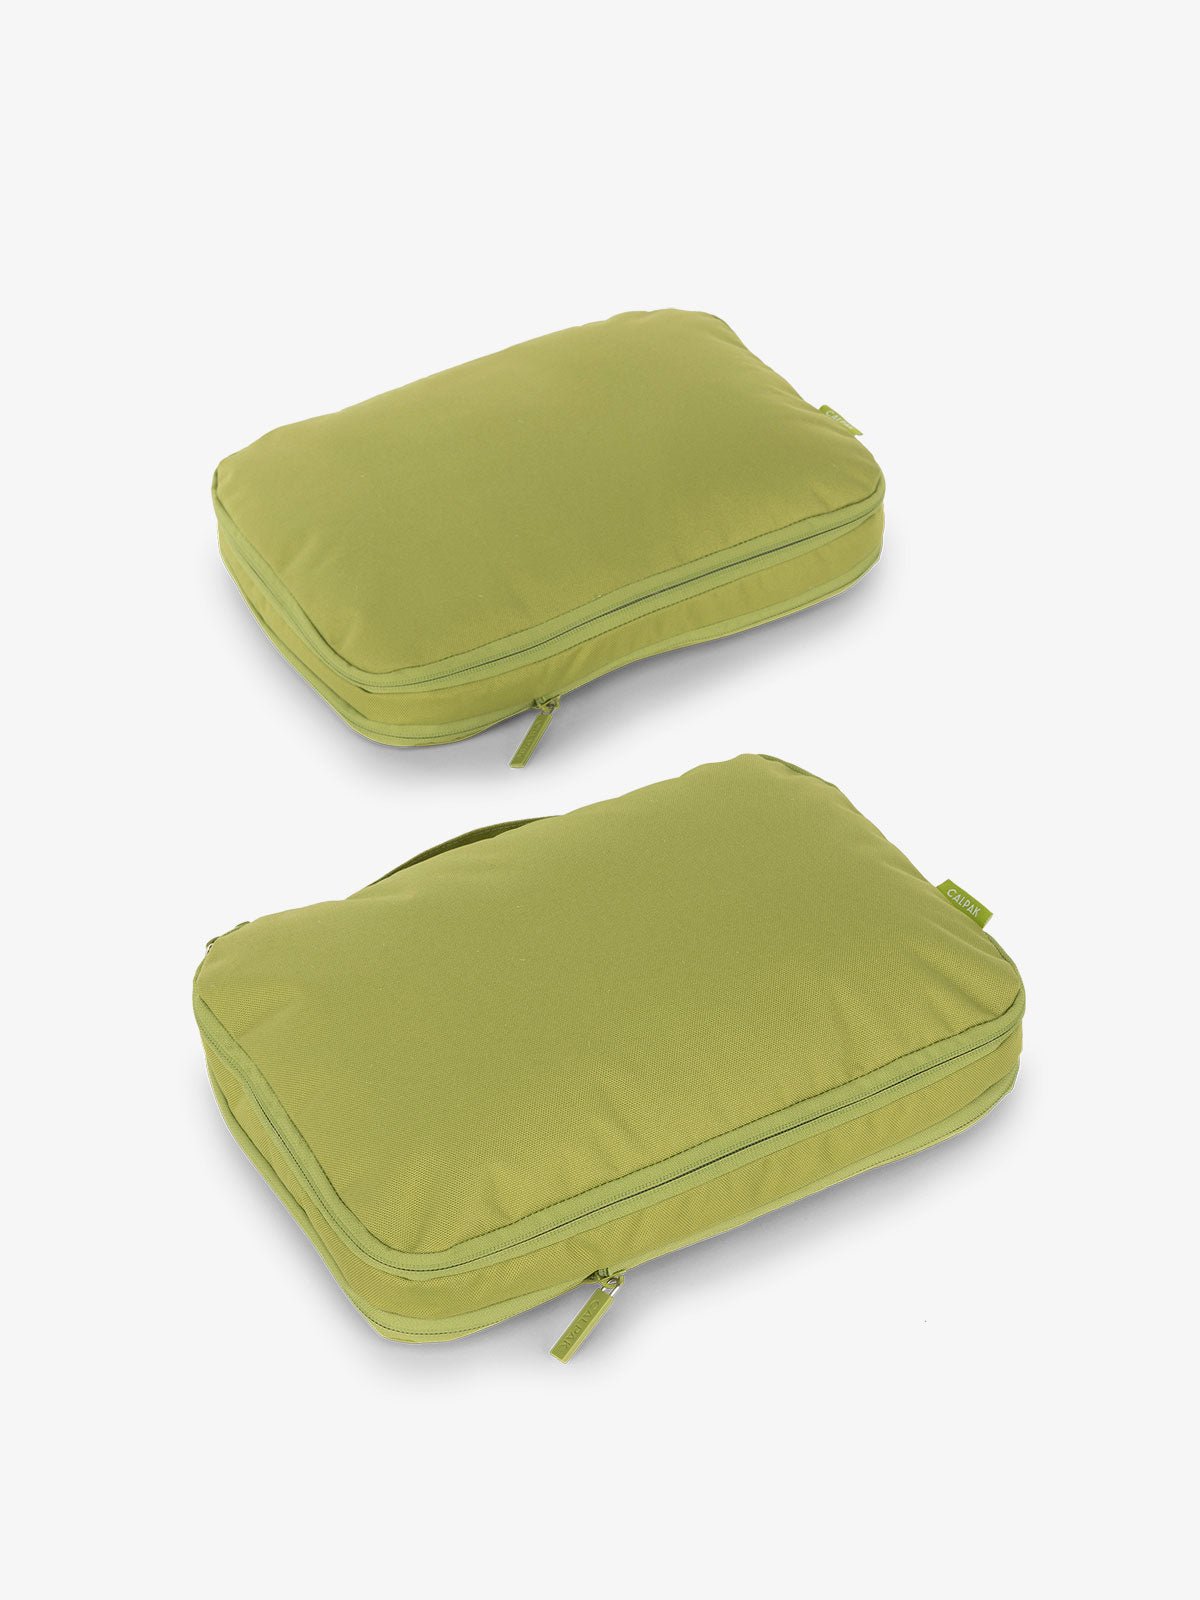 CALPAK compression packing cubes in plam